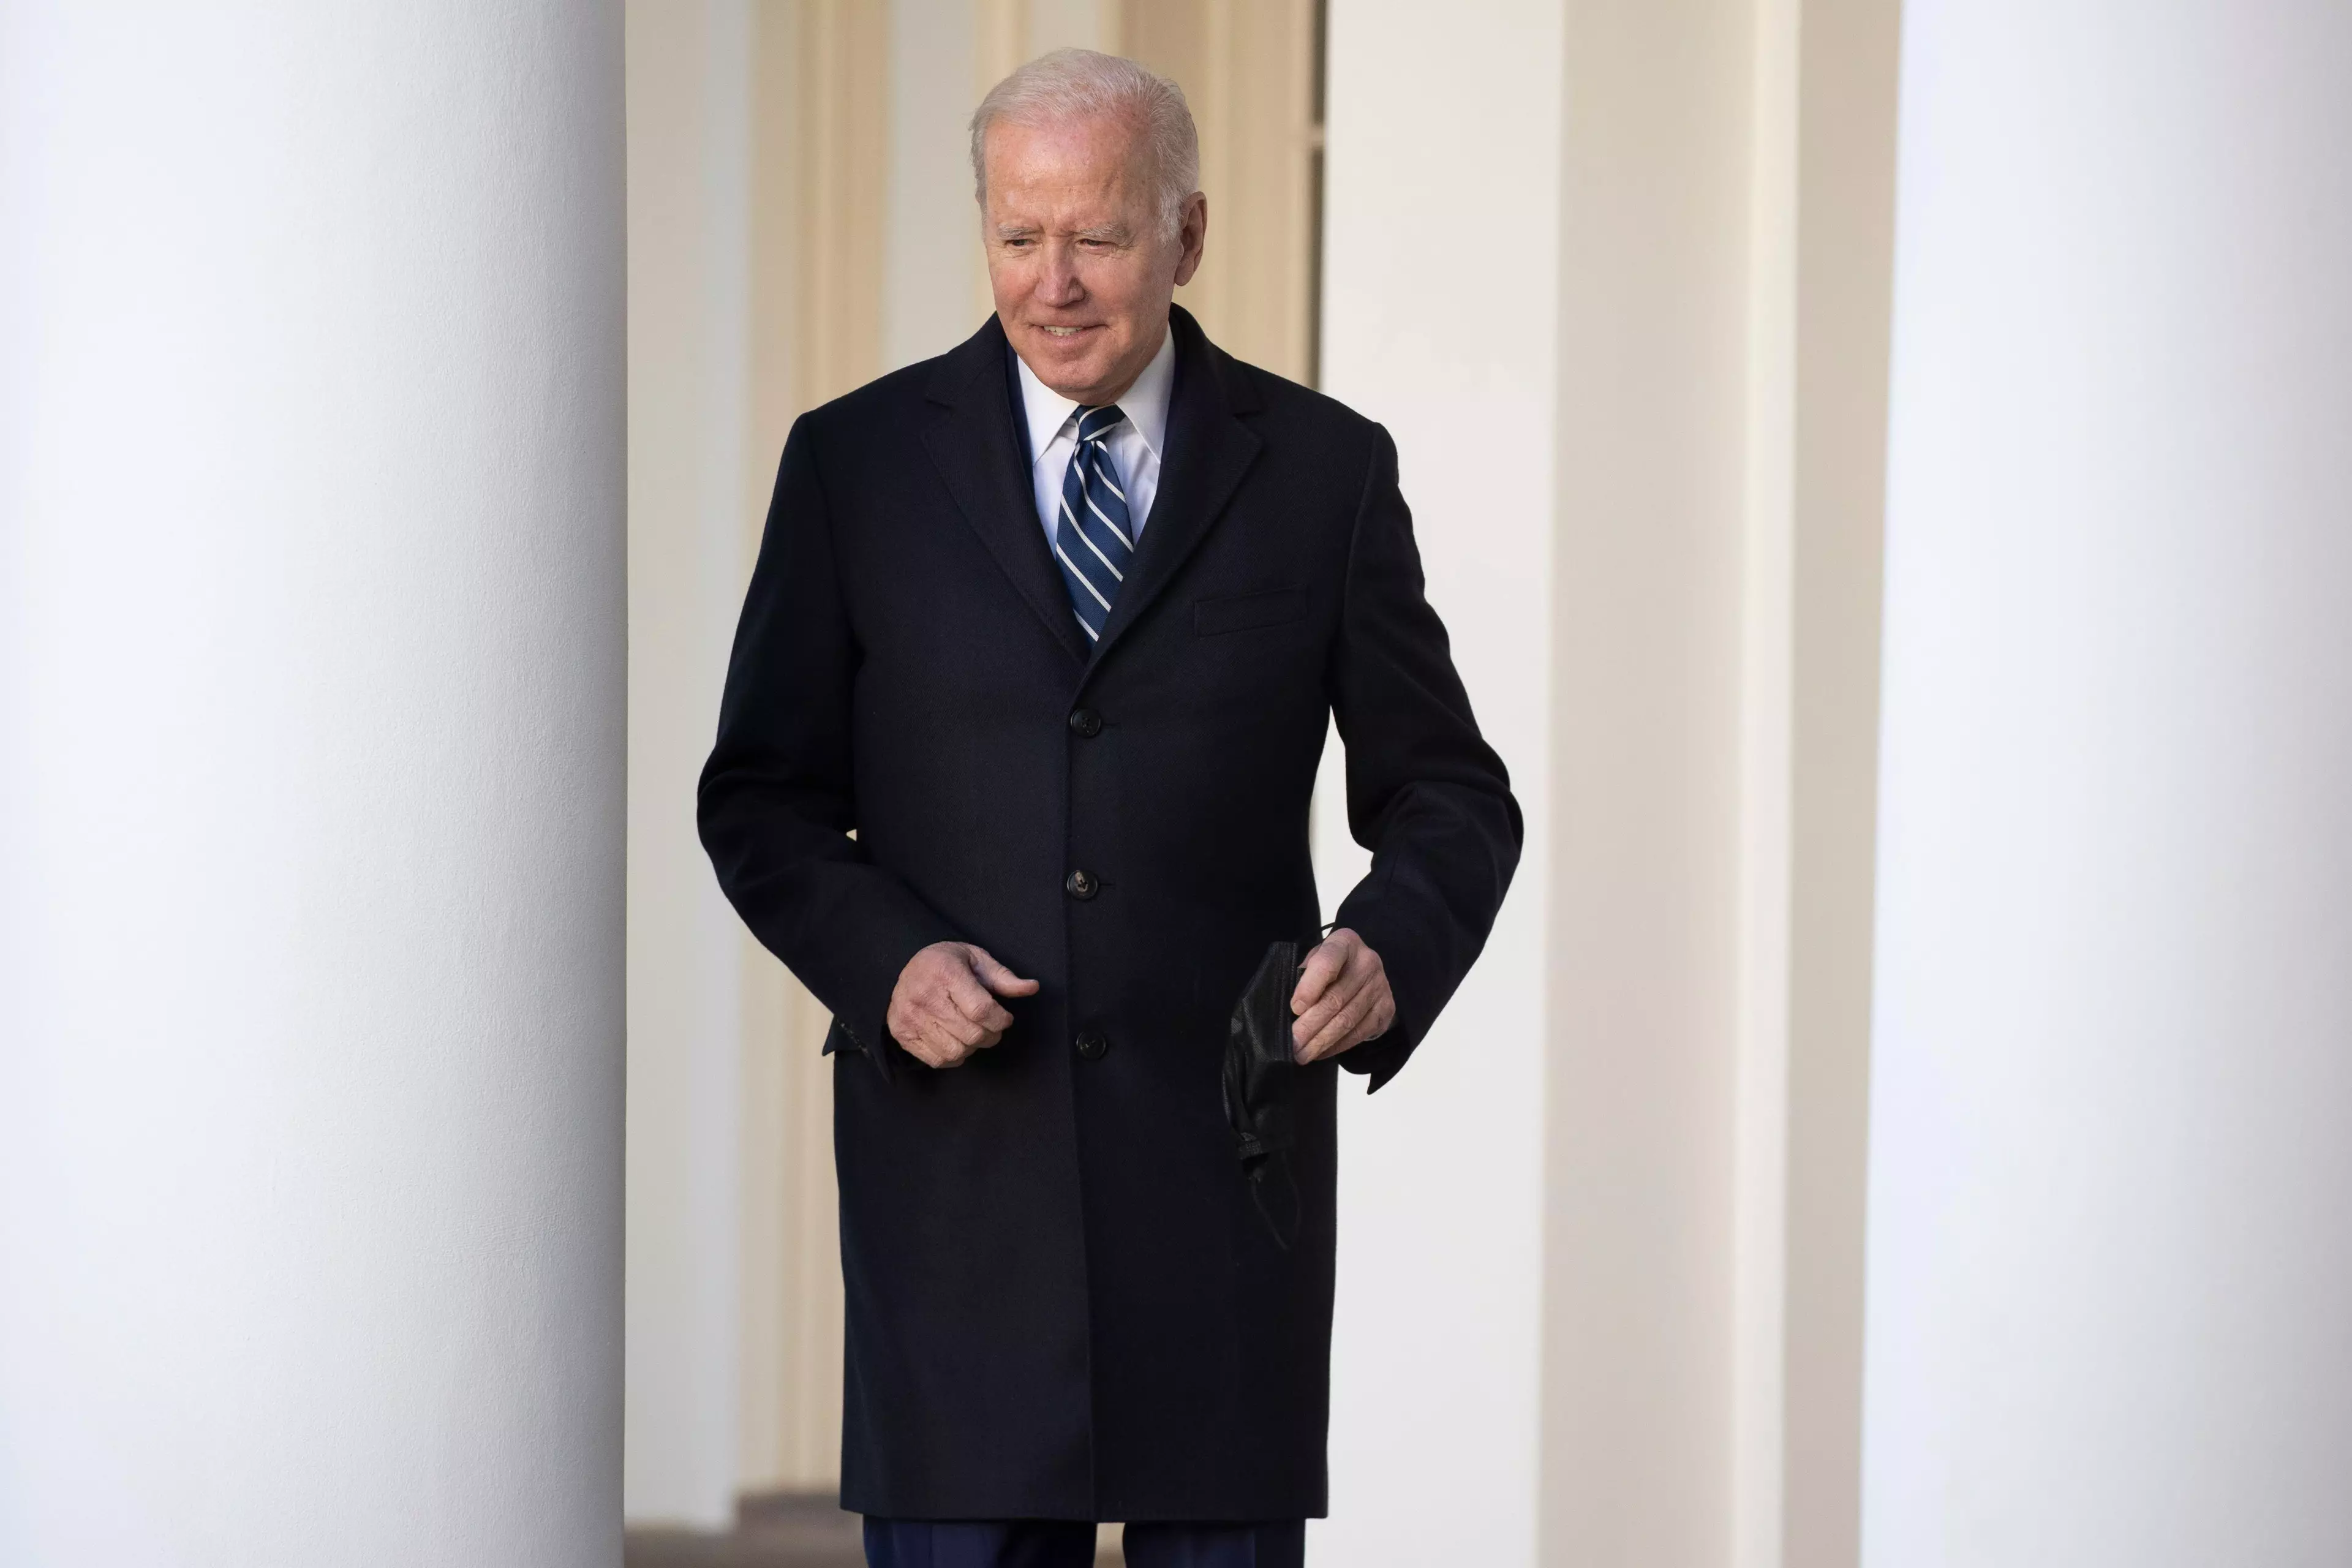 Joe Biden has said he is angry about the verdict.